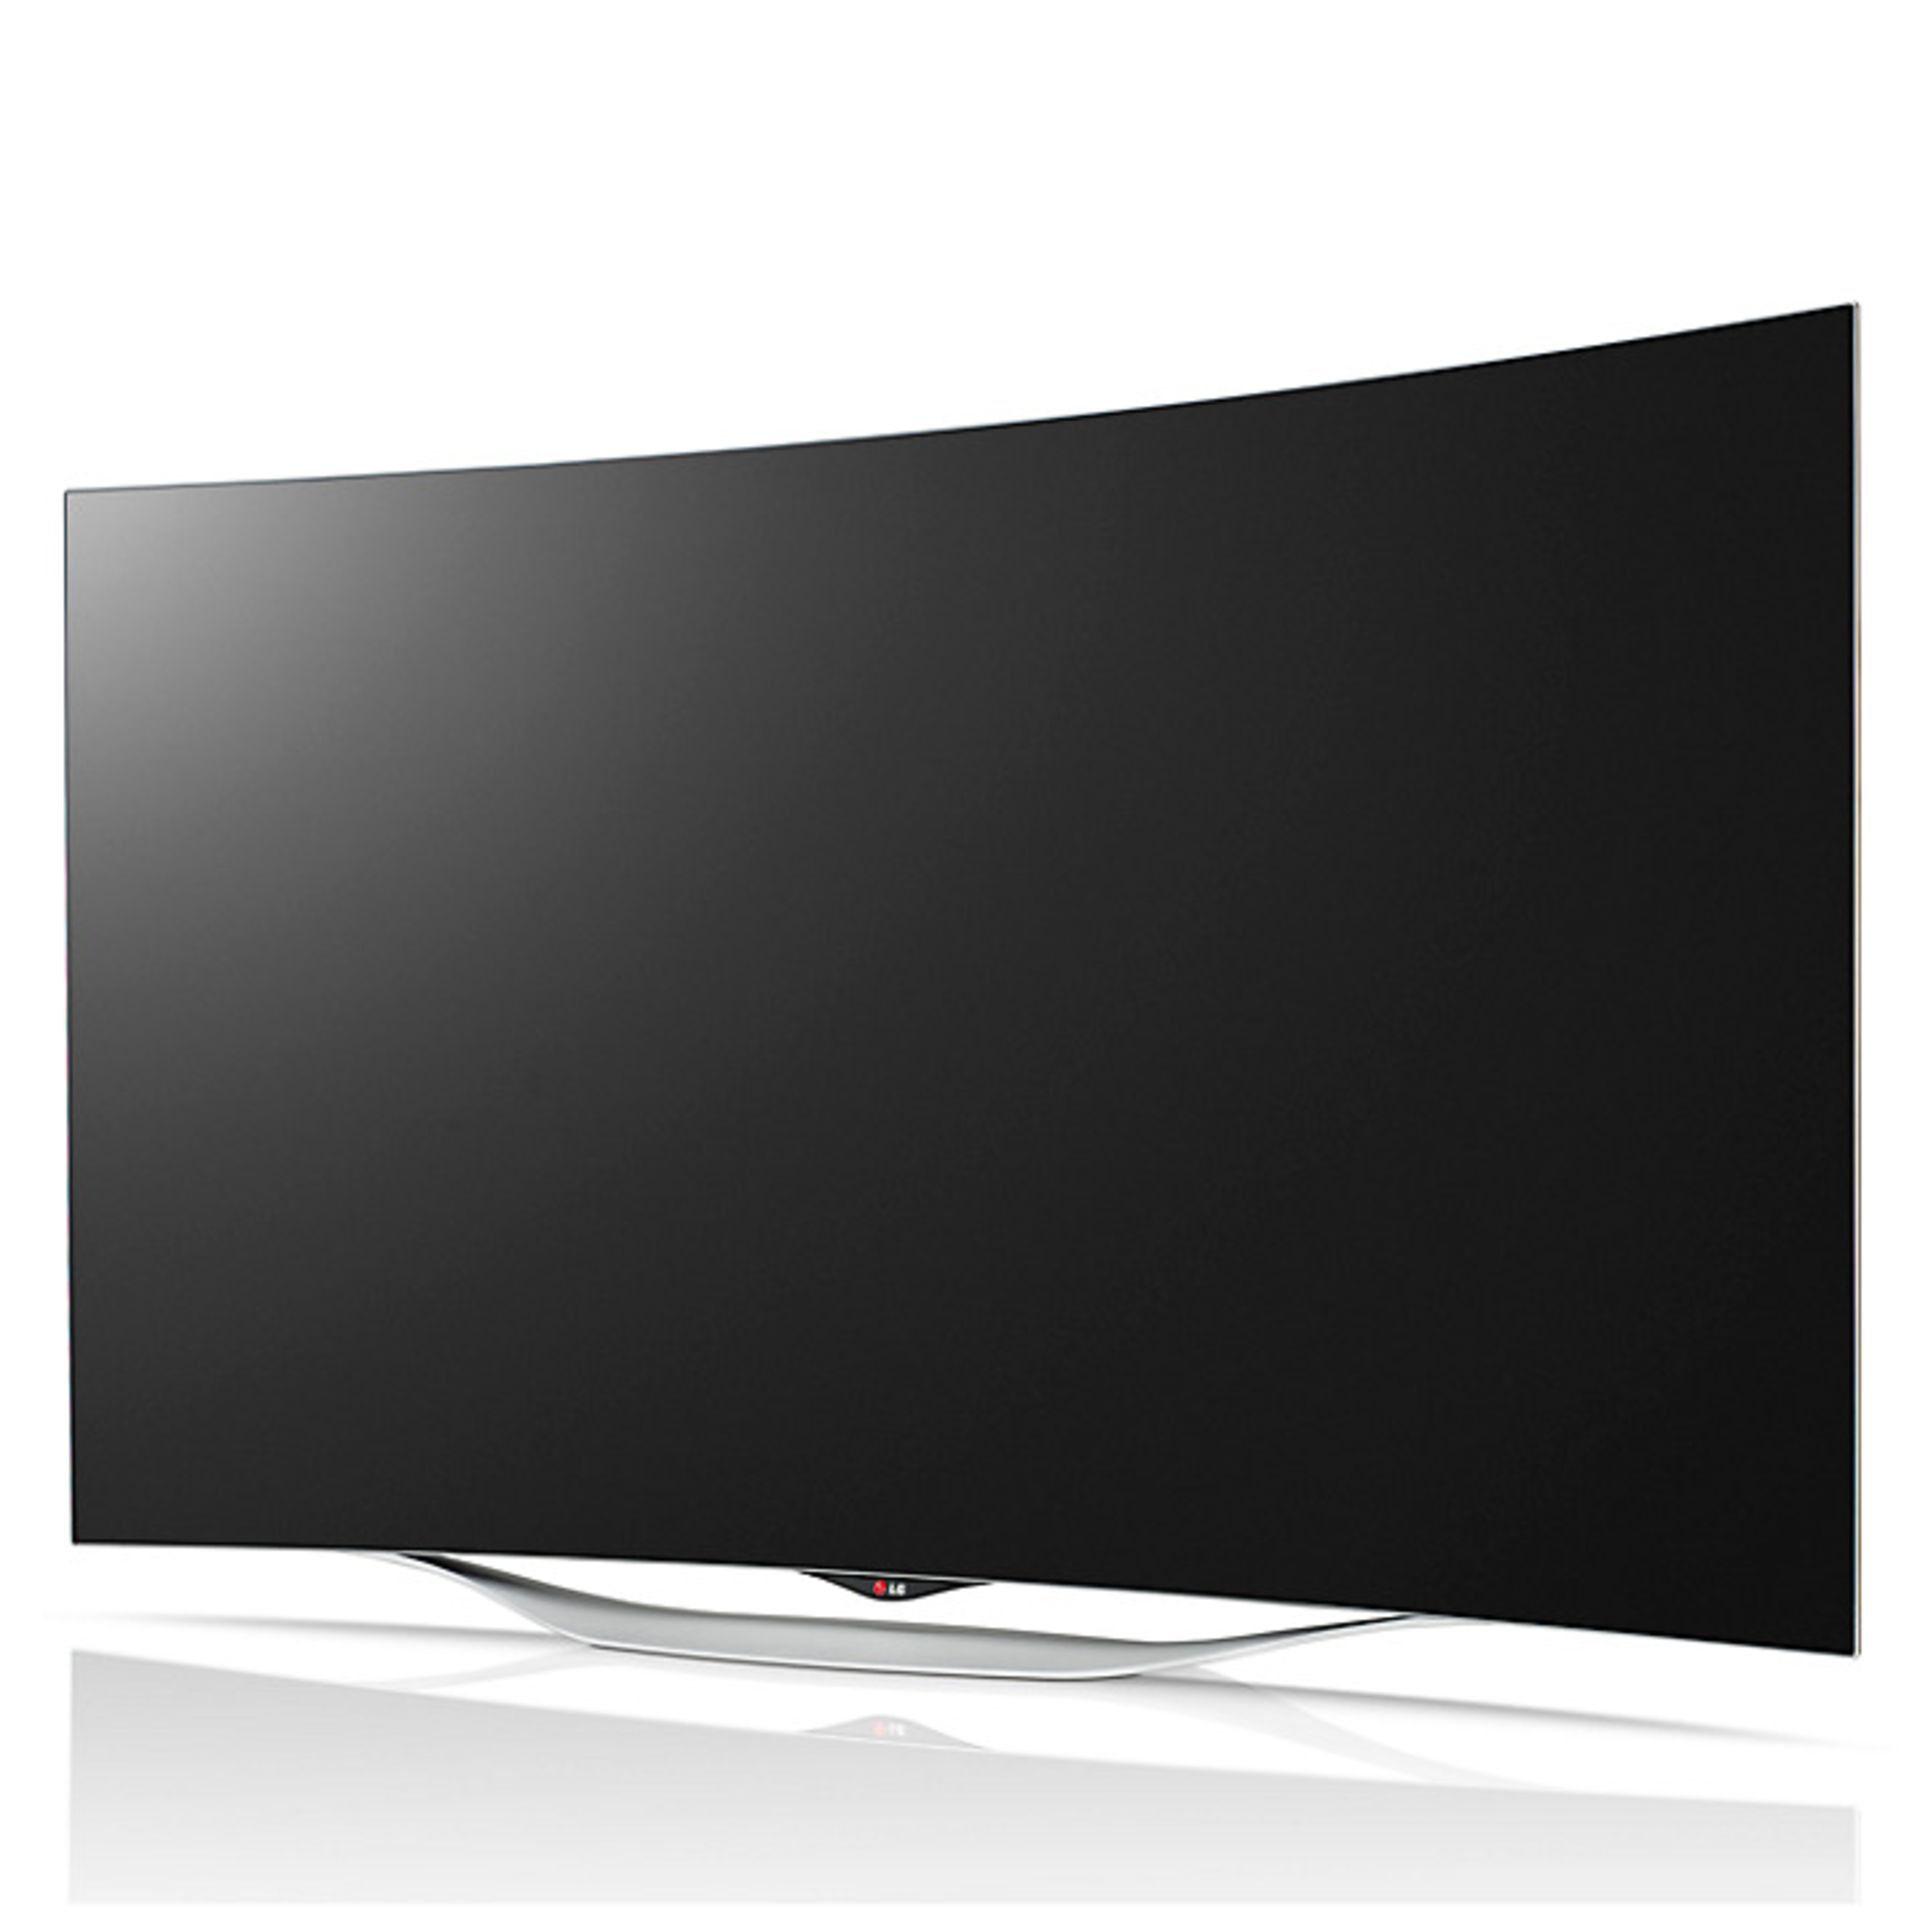 V Grade A 55EC930V 55" LG OLED Curved Smart 3D TV With Freeview HD - RRP: £3699.97 Argos £1799. - Image 2 of 4